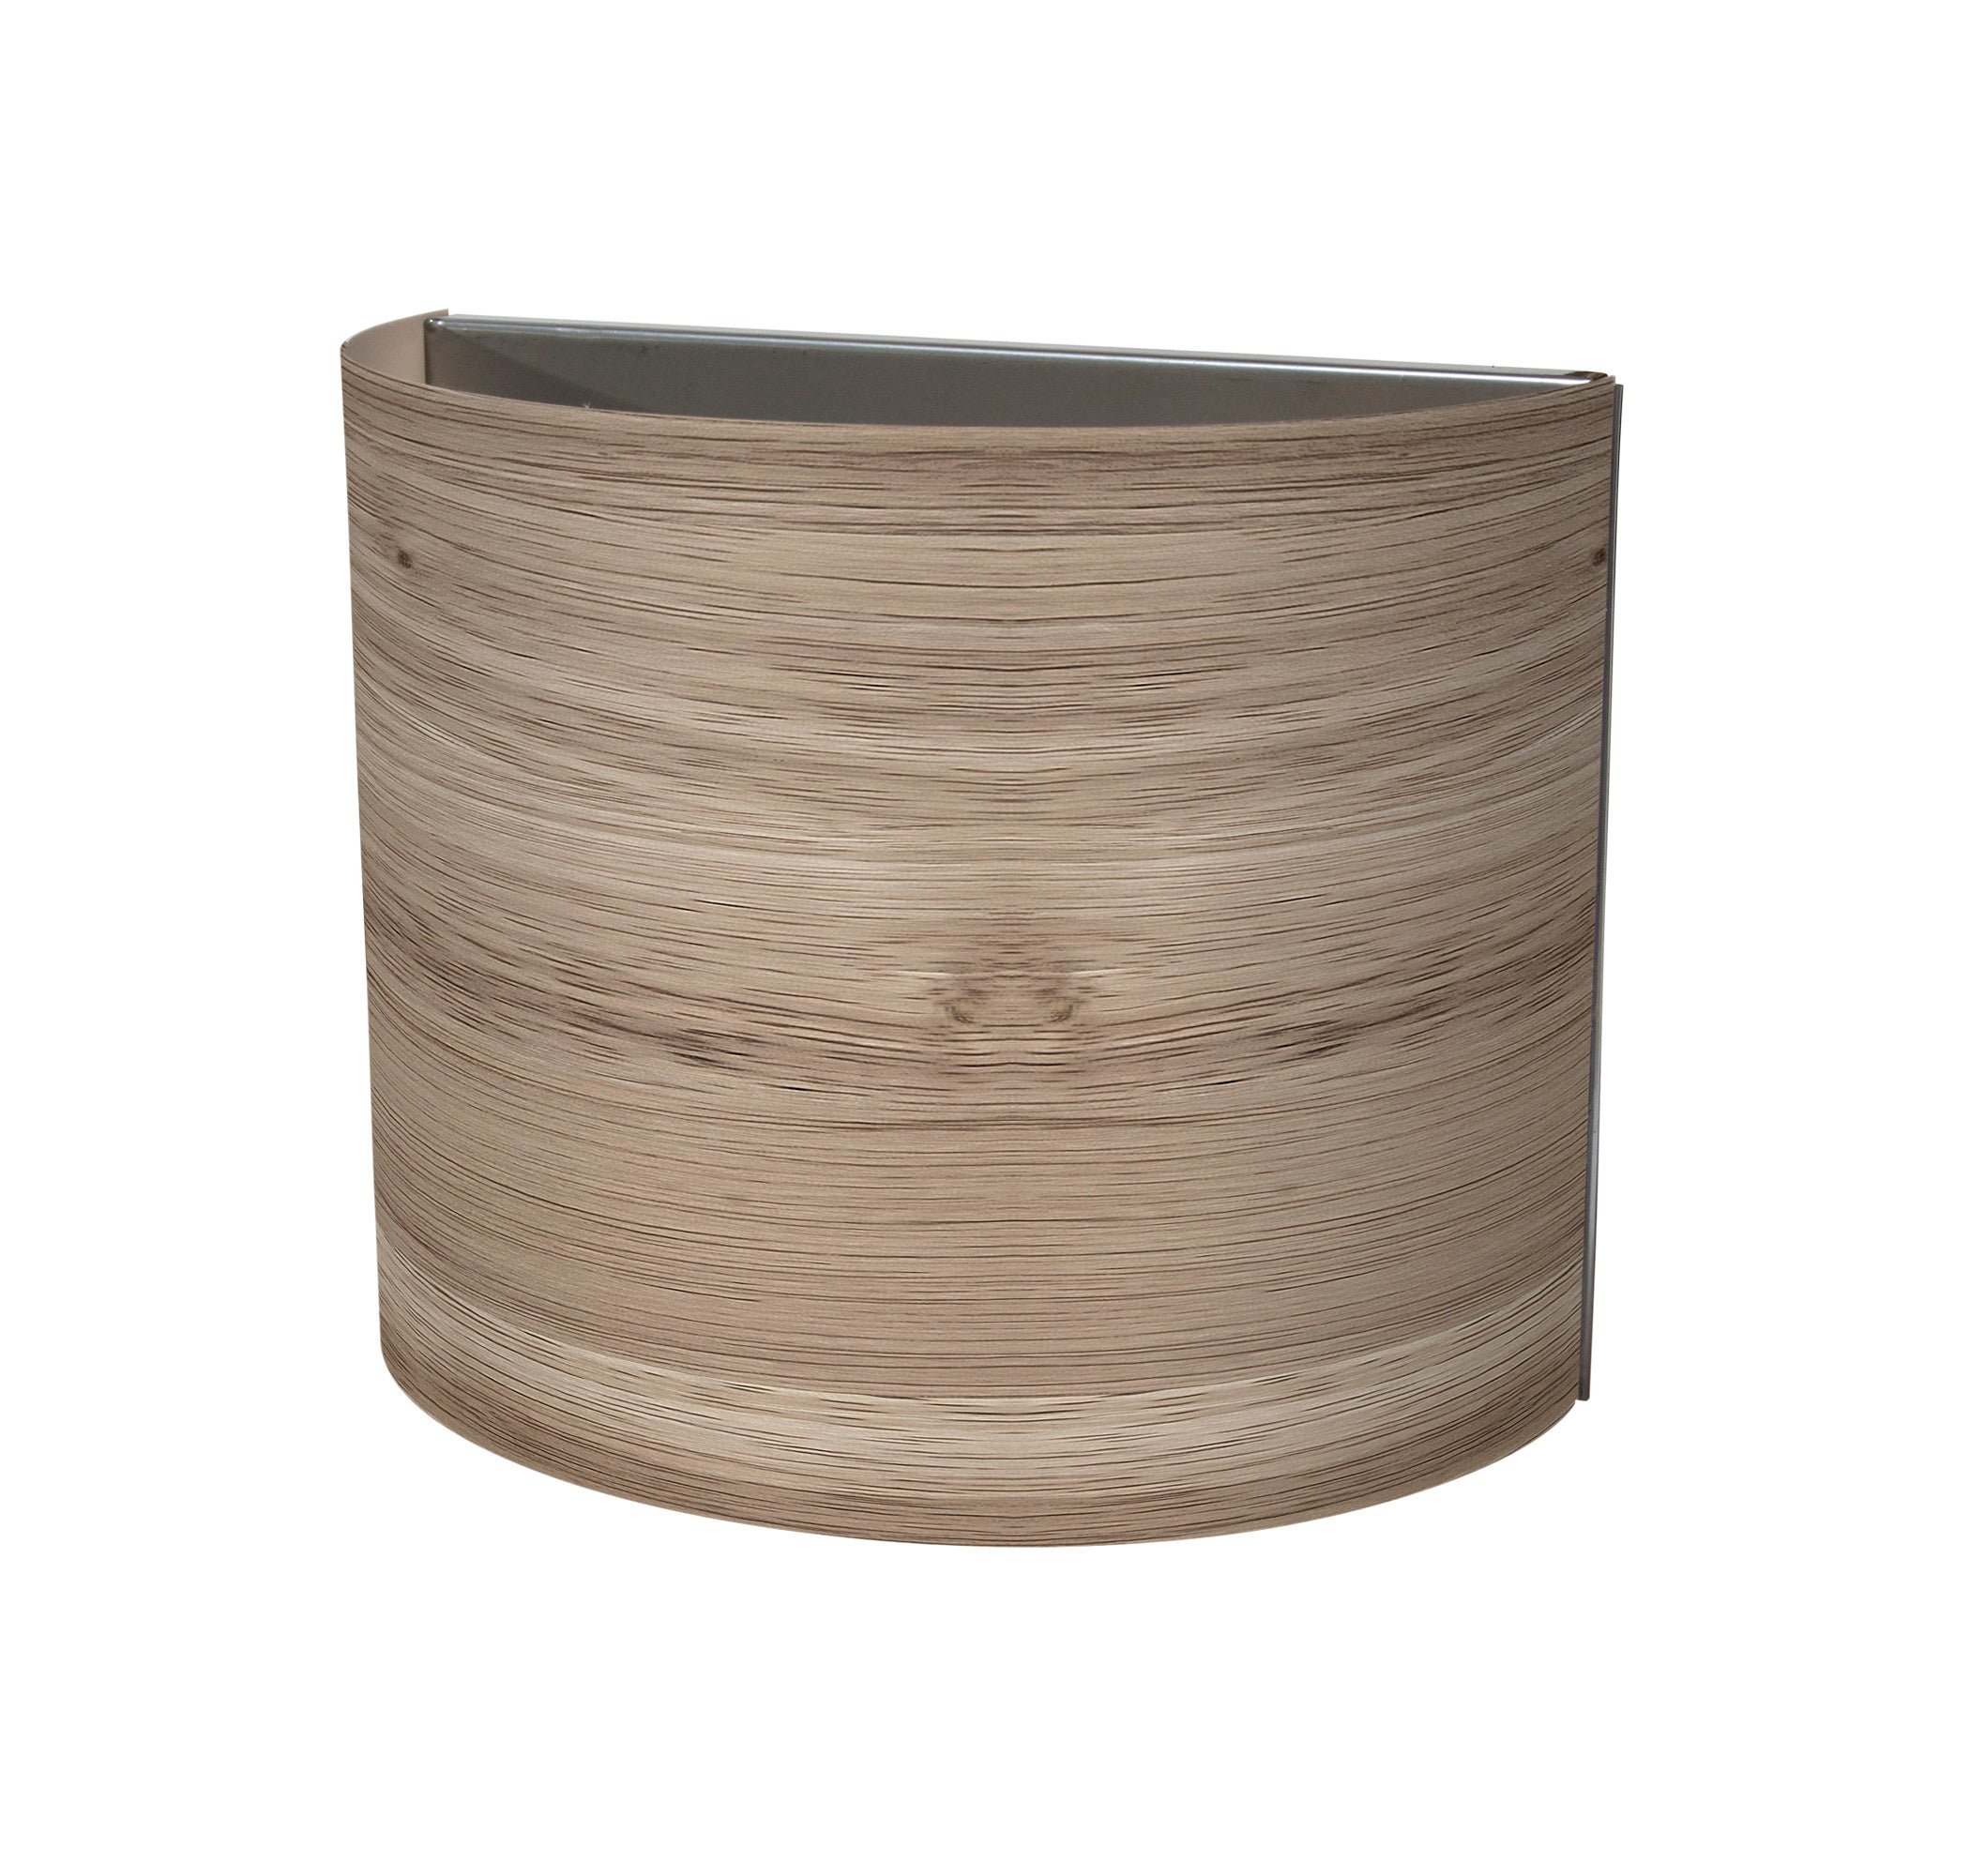 The Vita Wall Sconce from Seascape Fixtures in photo veneer, natural color.